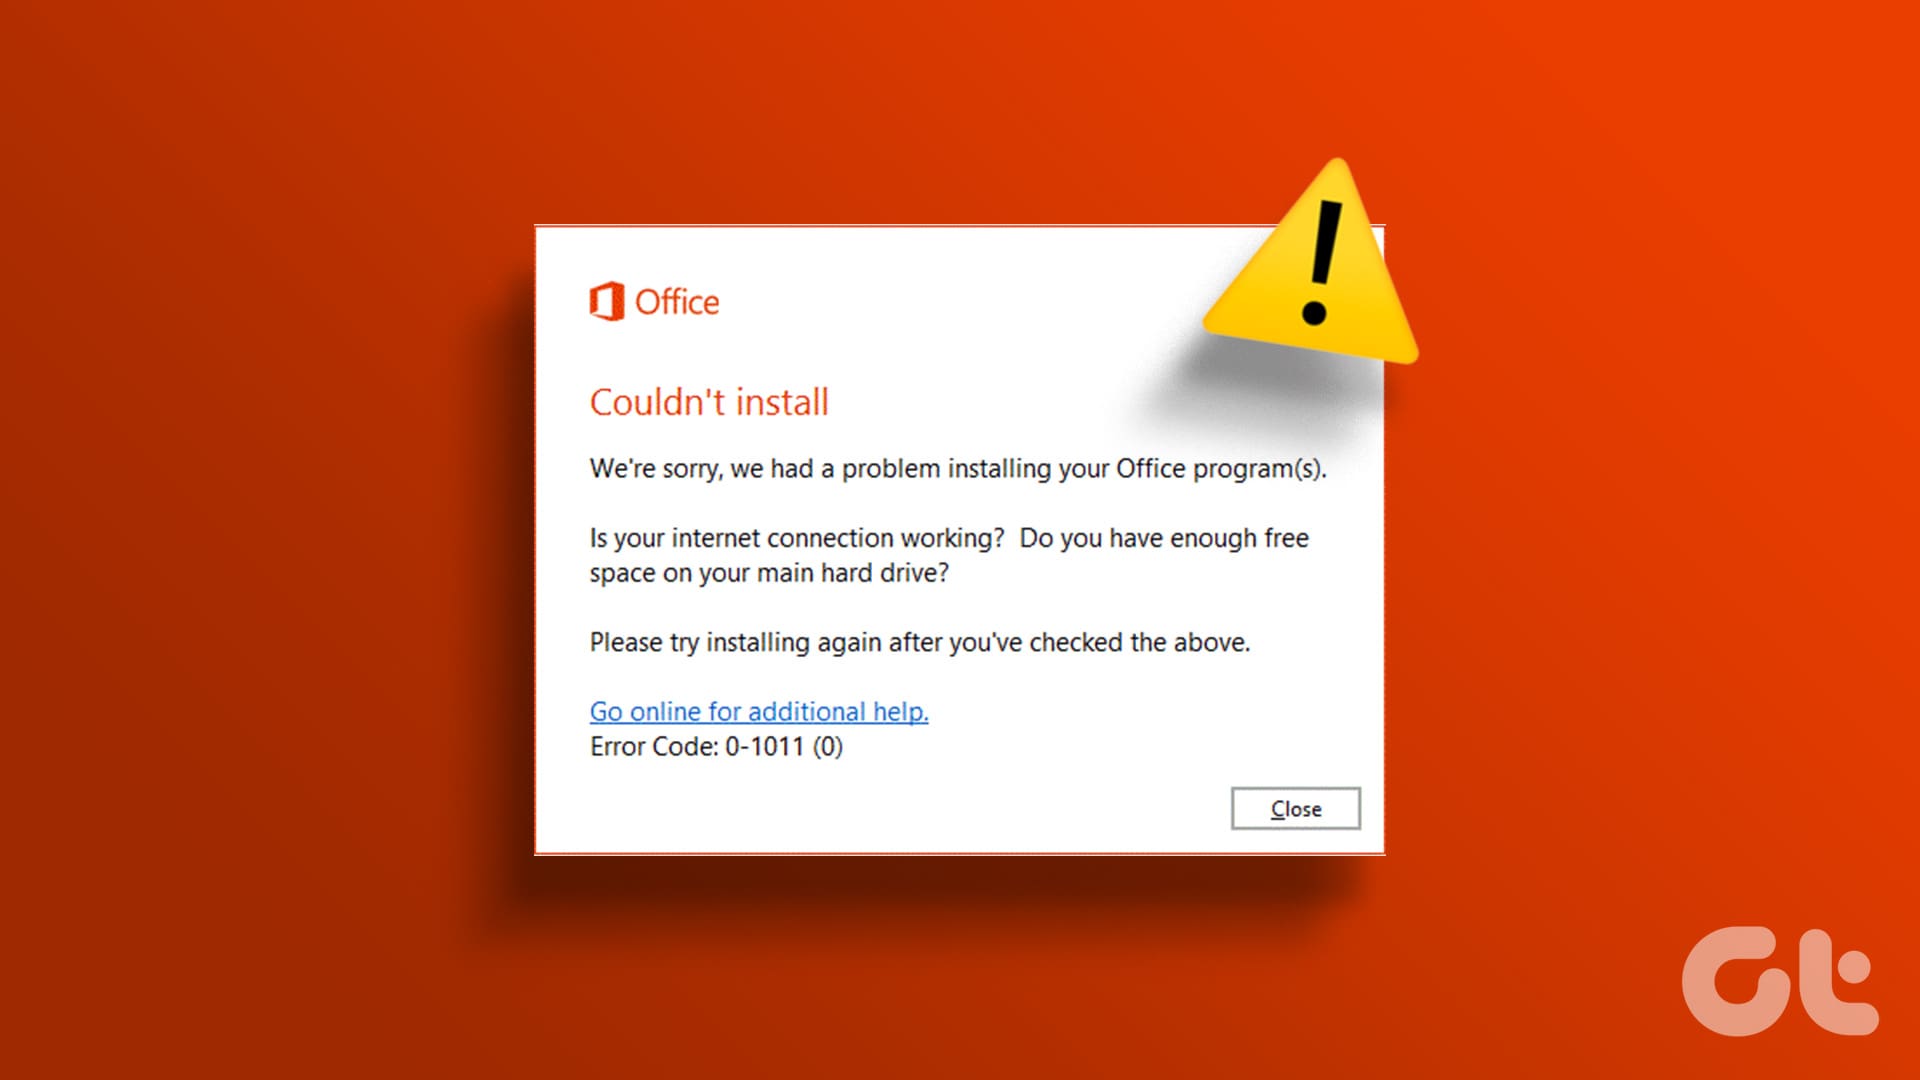 Step 9: In the Microsoft Office Installer window, select the Repair option and click Continue
Step 10: Follow the on-screen instructions to repair the Office programs